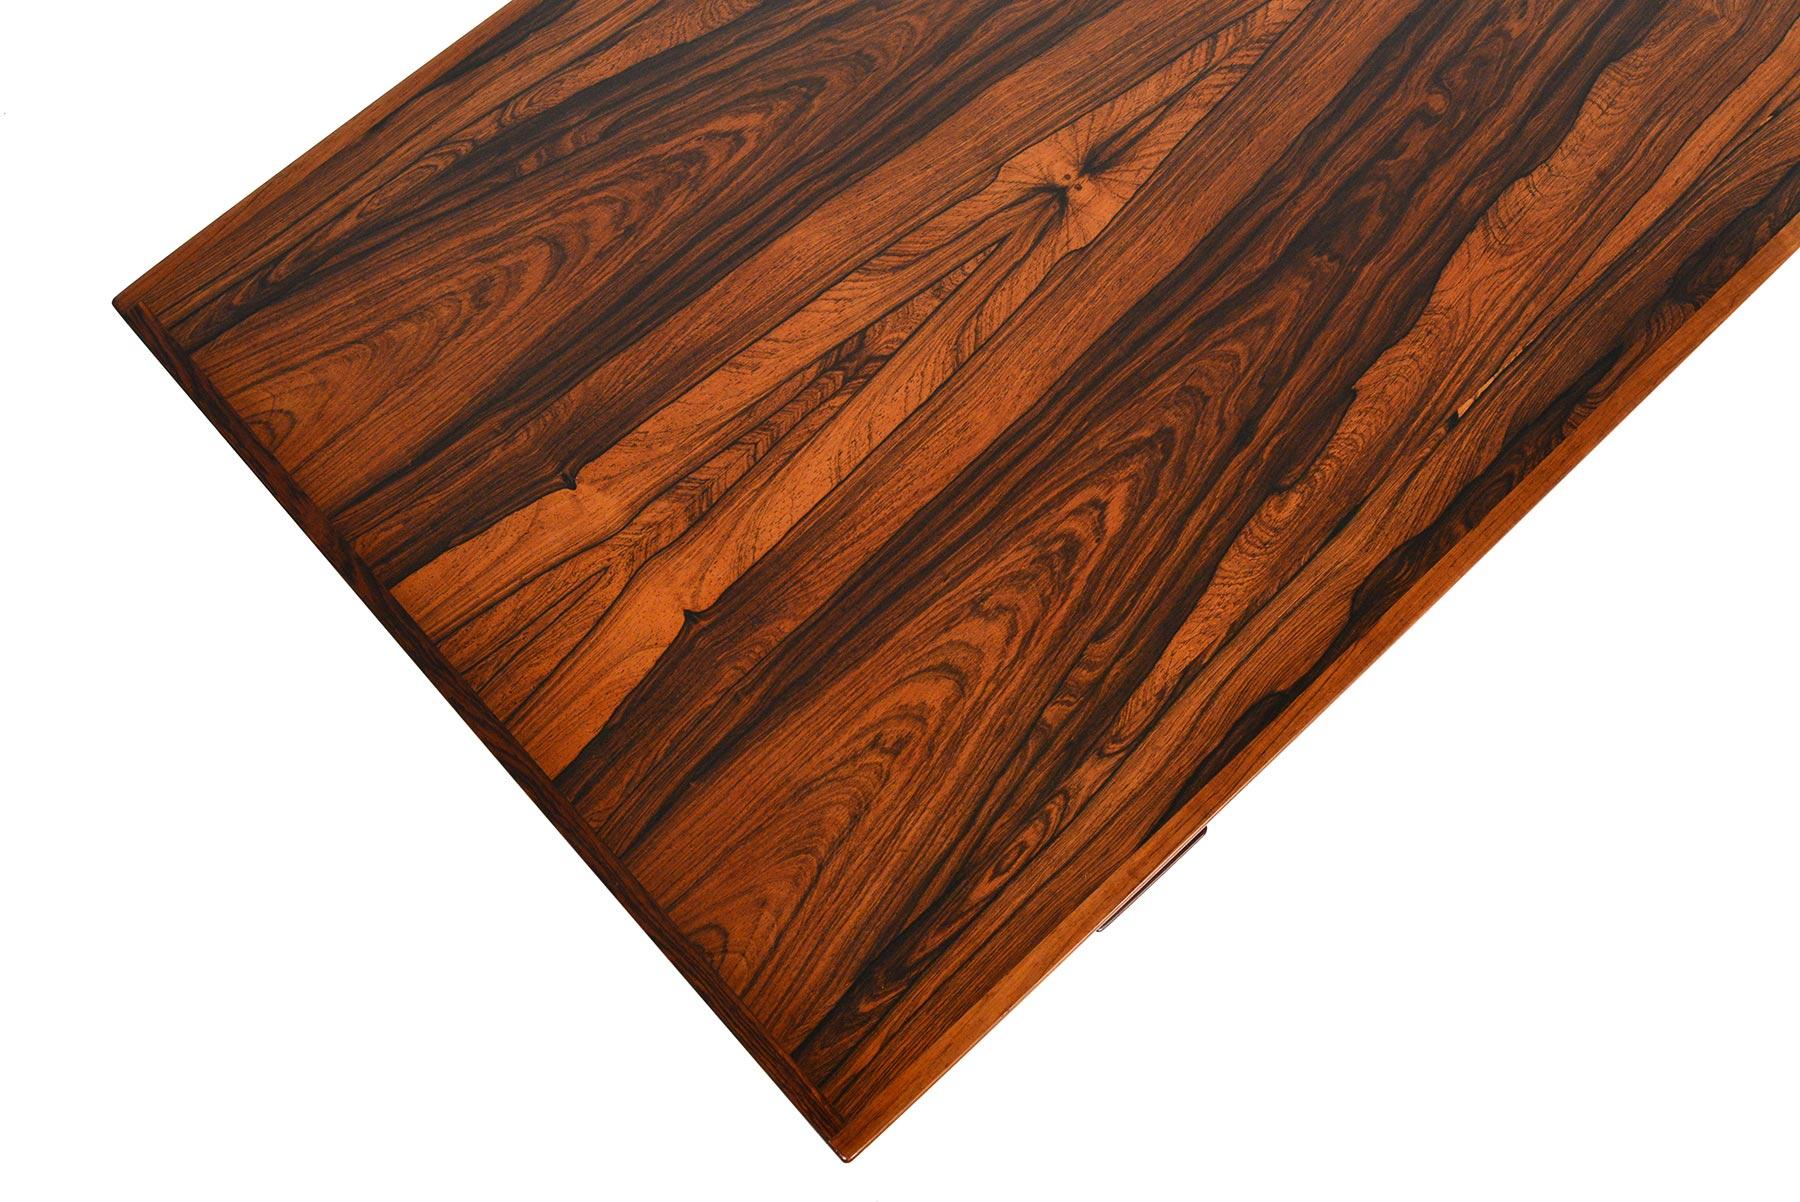 This Danish modern coffee table is crafted from beautiful Brazilian rosewood in a stunning book- matched design. This piece not only offers handsome lines and stately tapered legs, but a wonderfully functional pull- out black laminate serving tray.